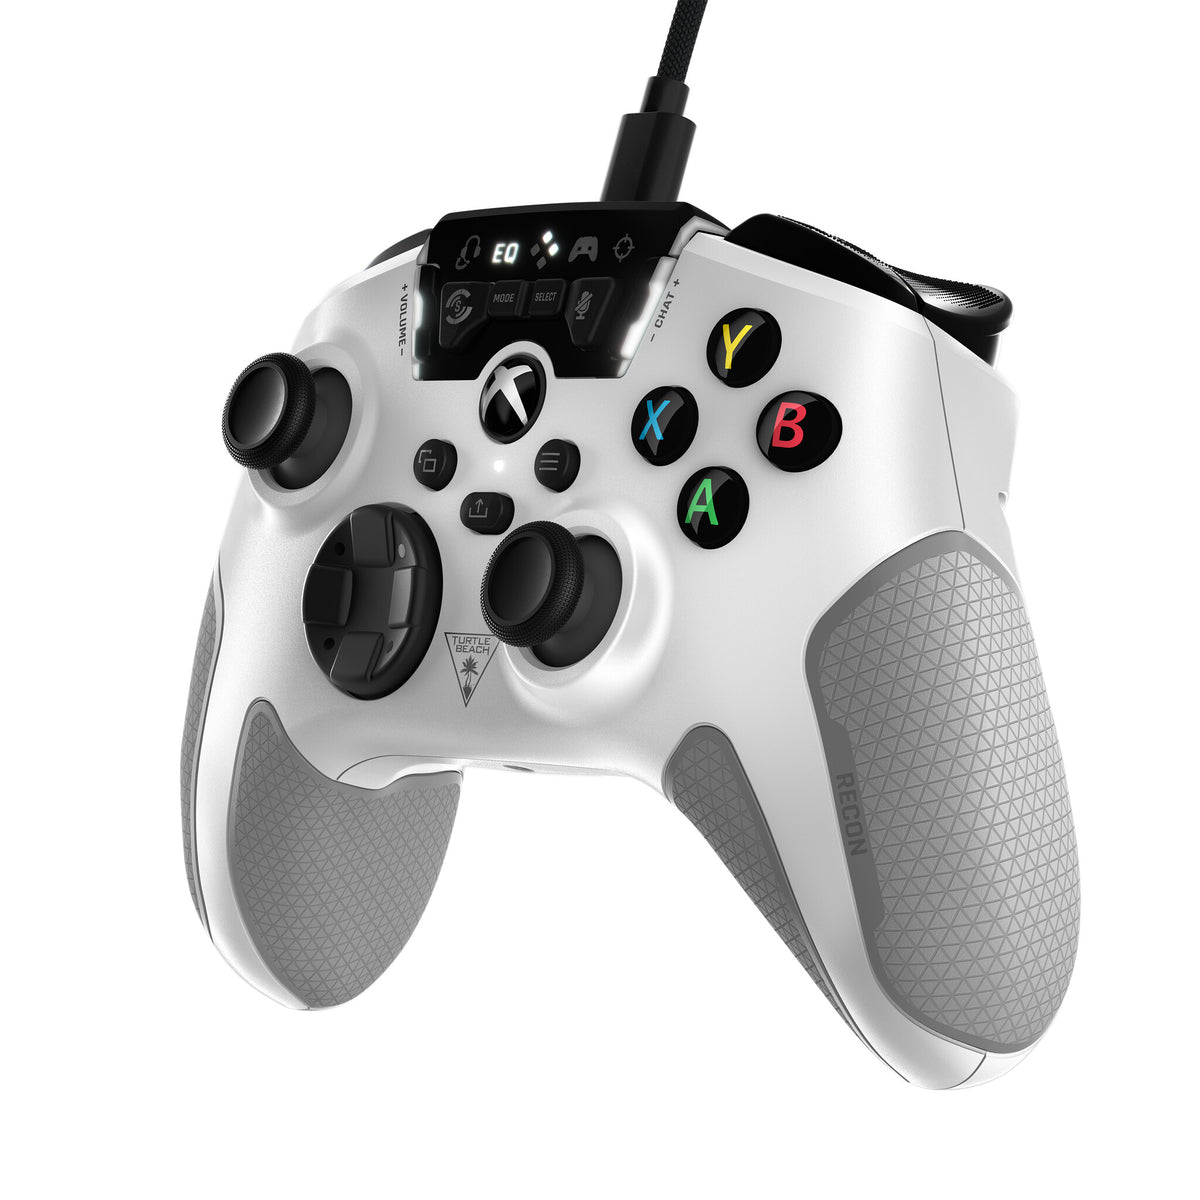 Turtle Beach Recon - USB Wired Gamepad for PC / Xbox Series X|S in Grey / White